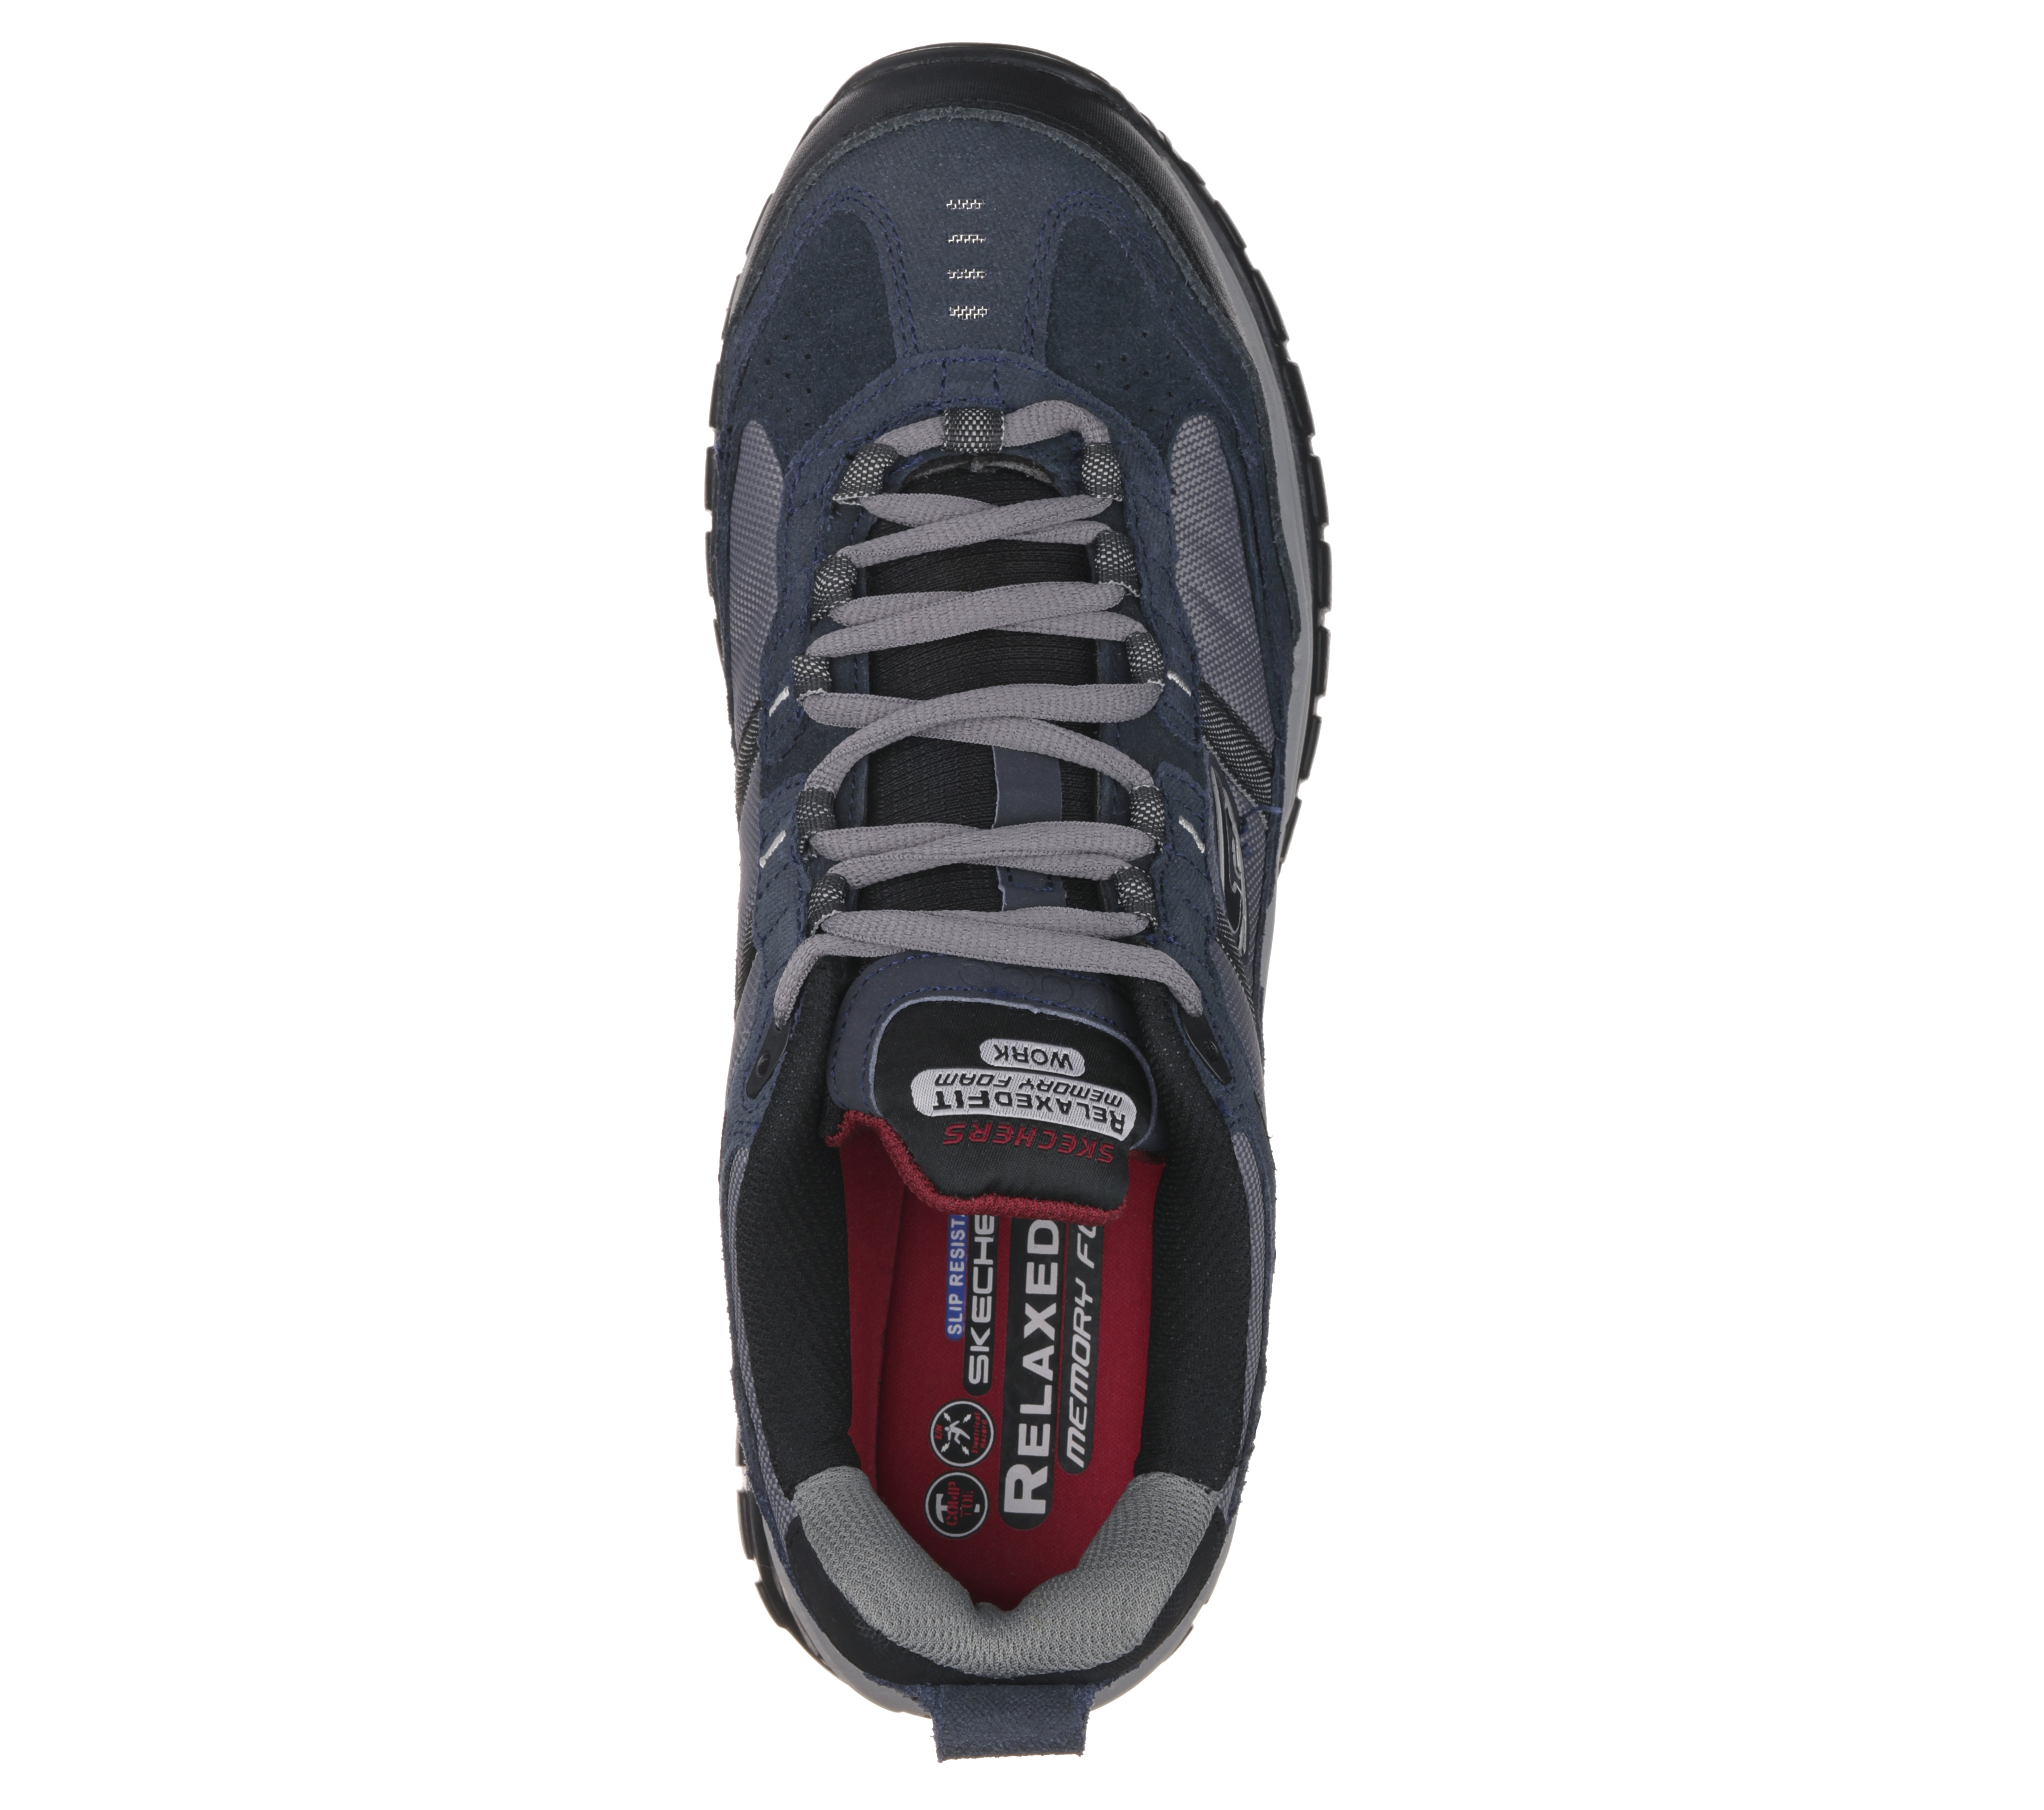 skechers 77013 review